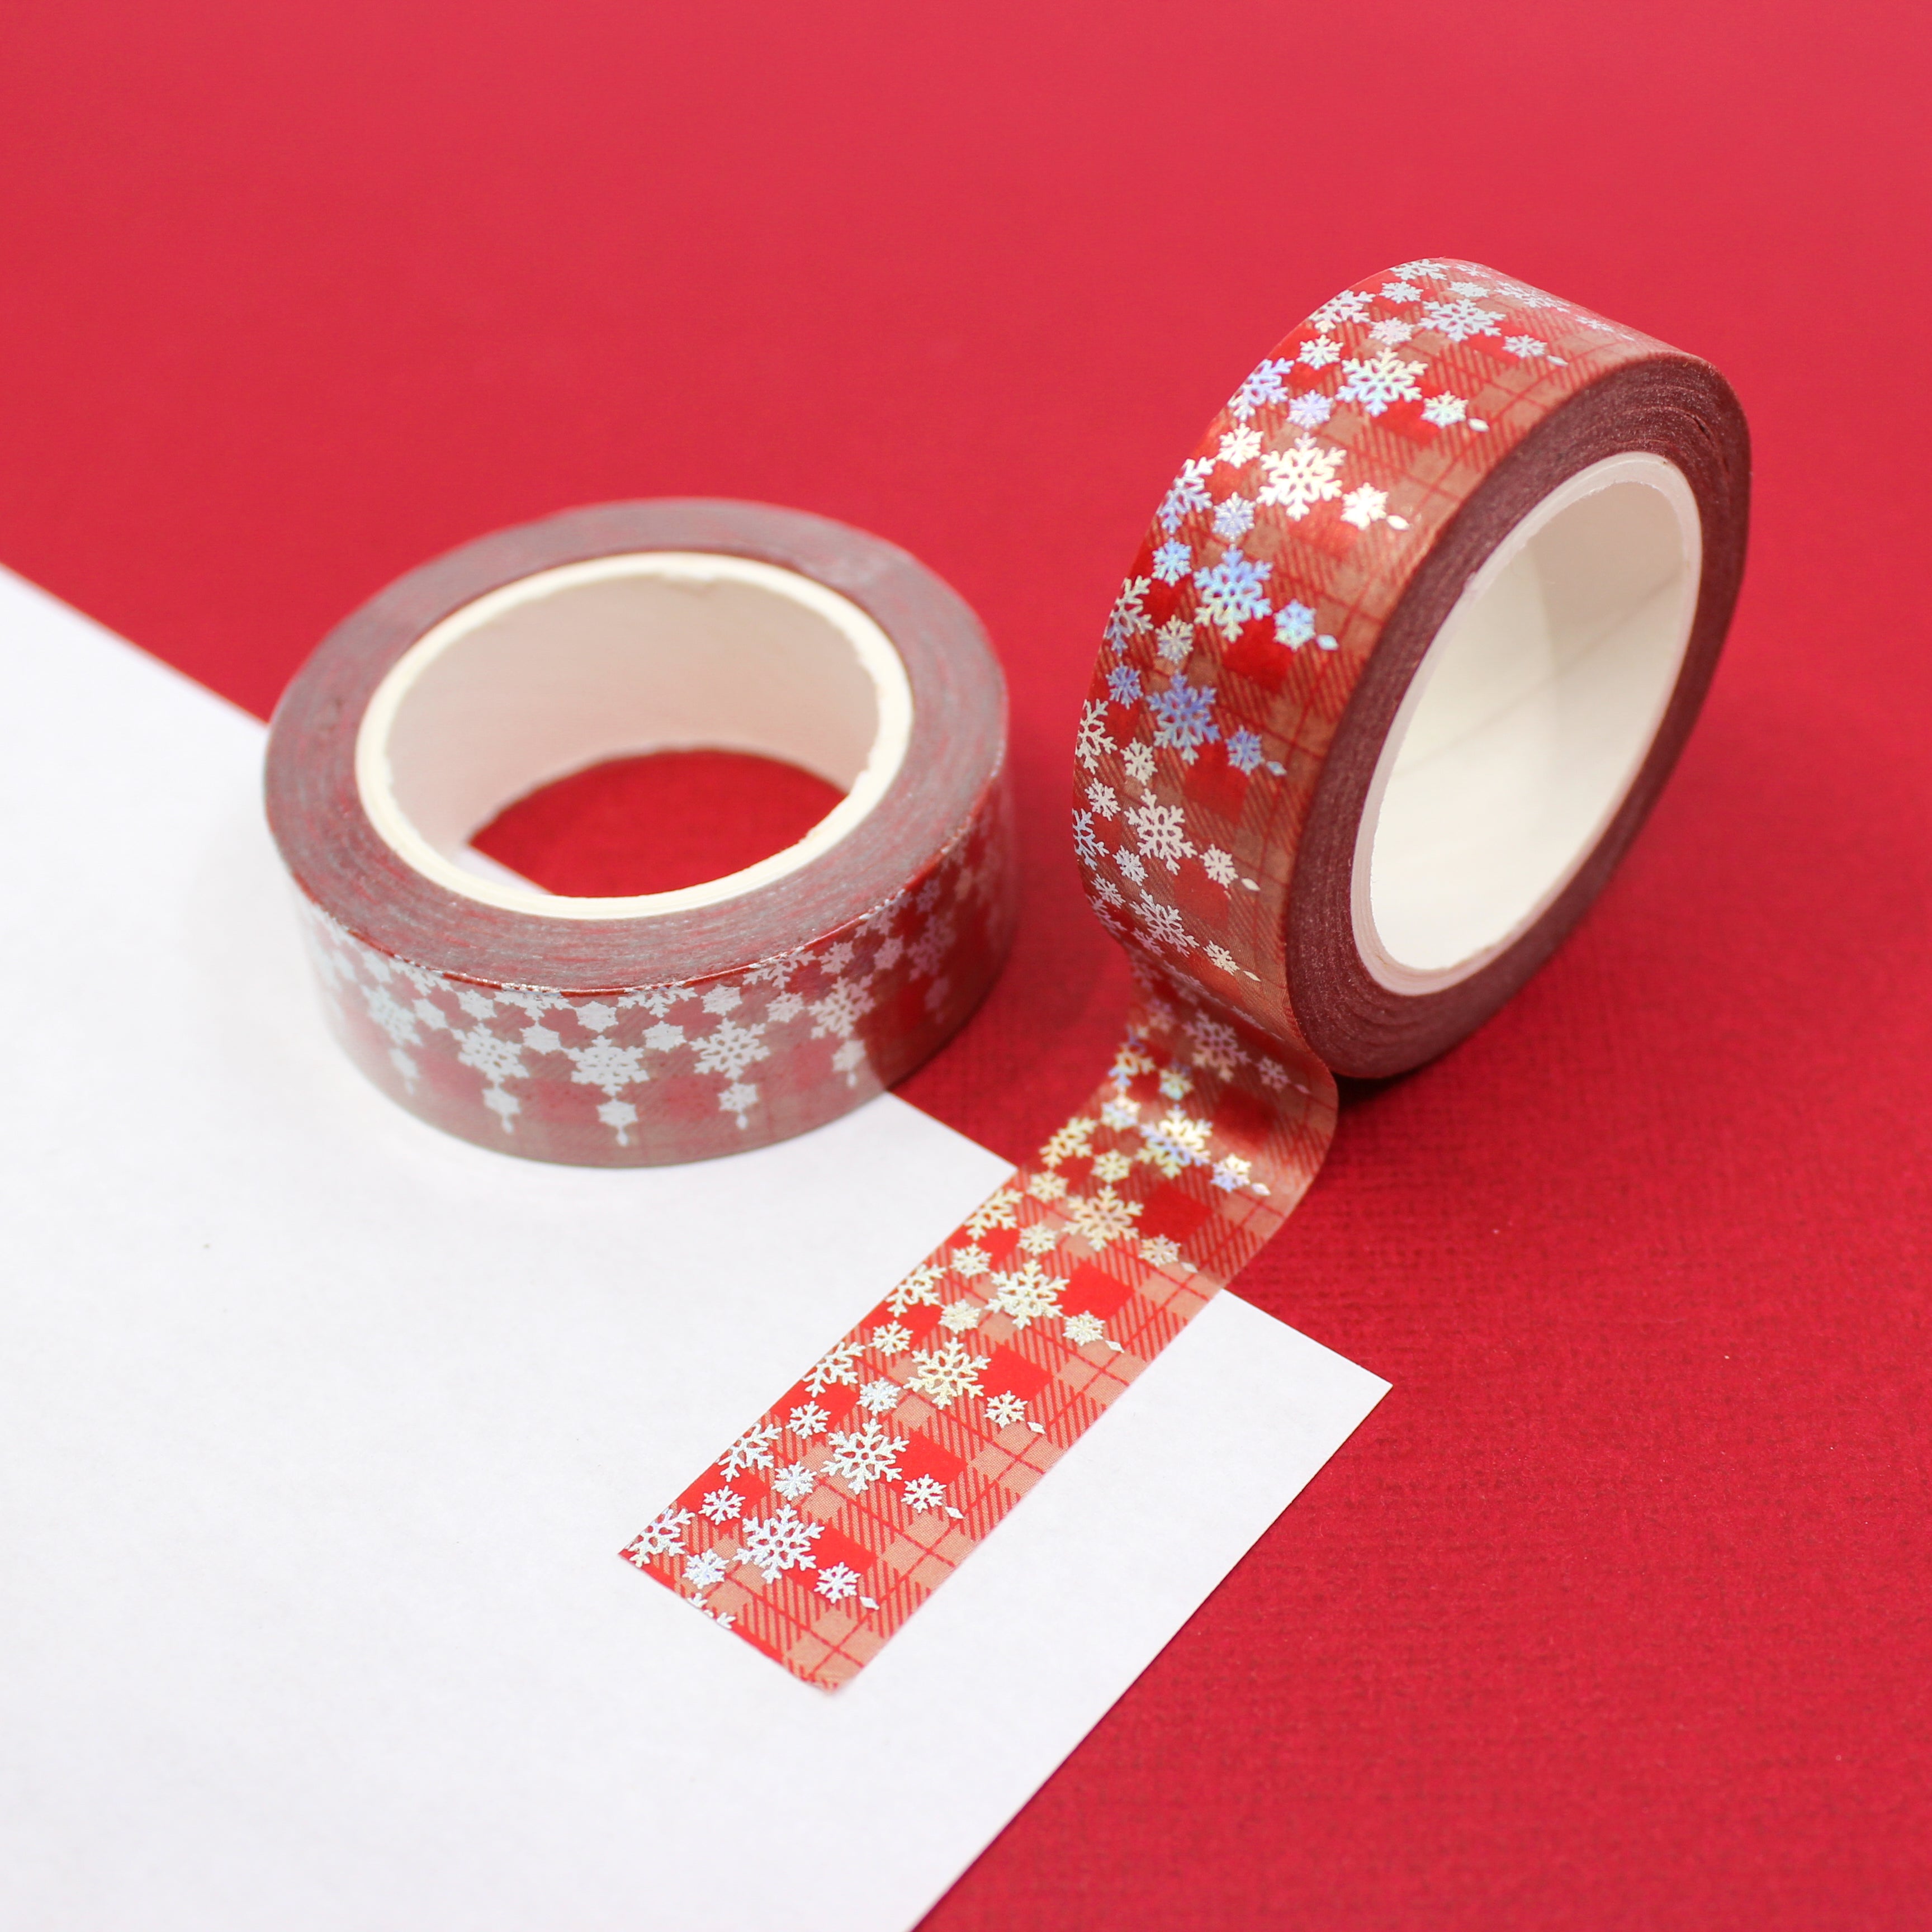 This is a beautiful silver foil snowflake pattern washi tape on a traditional Holiday red plaid  Background from BBB Supplies Craft Shop